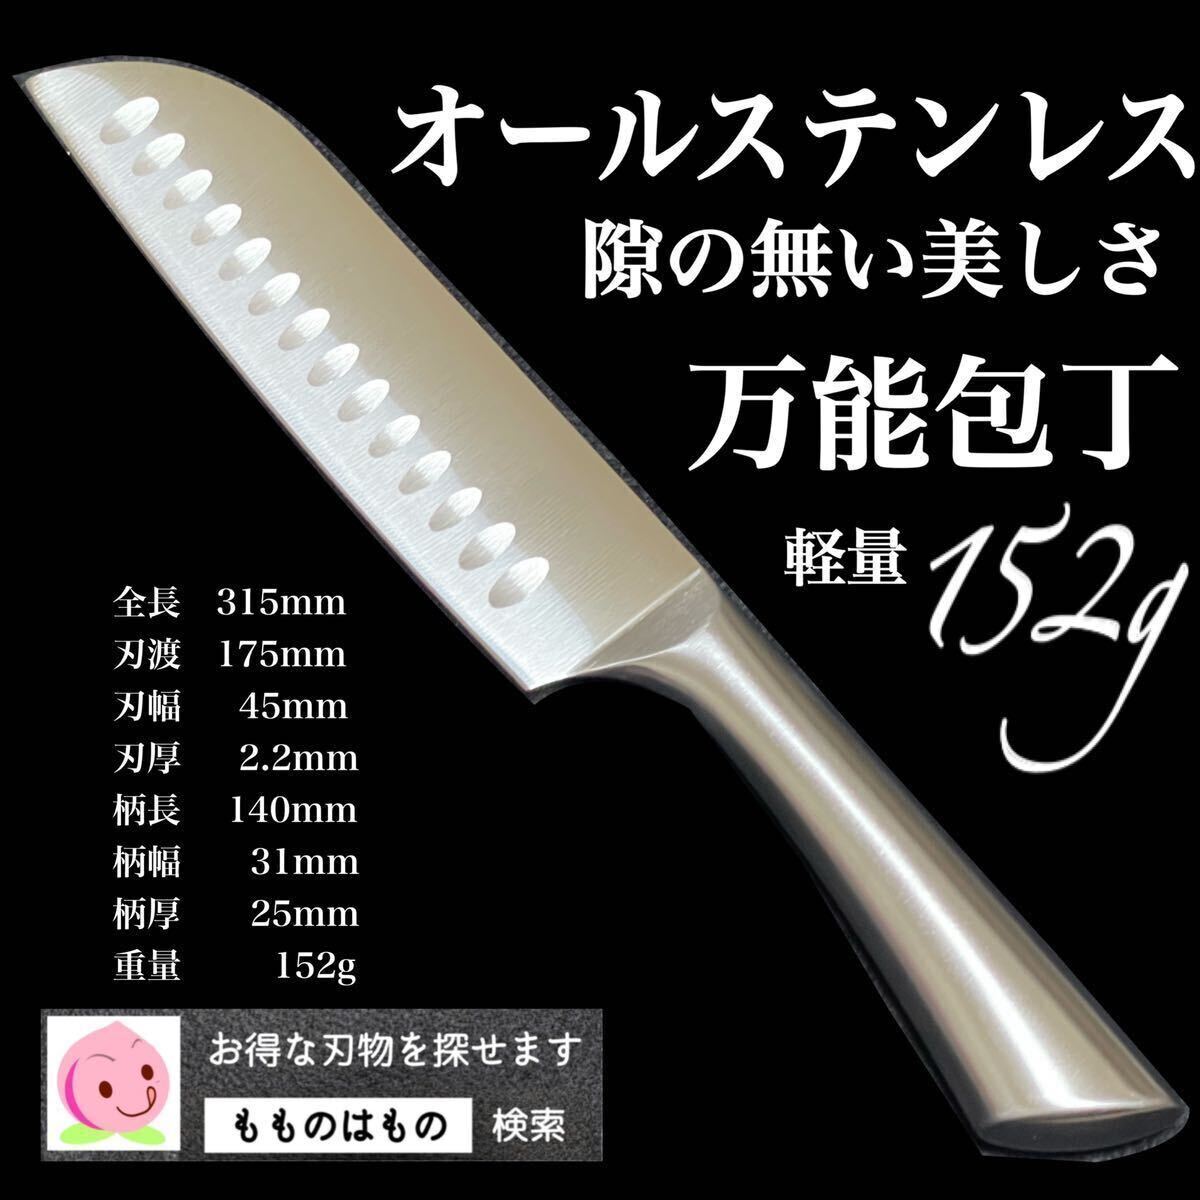  all stain less light weight all-purpose knife cat pohs immediately shipping . thing is thing 